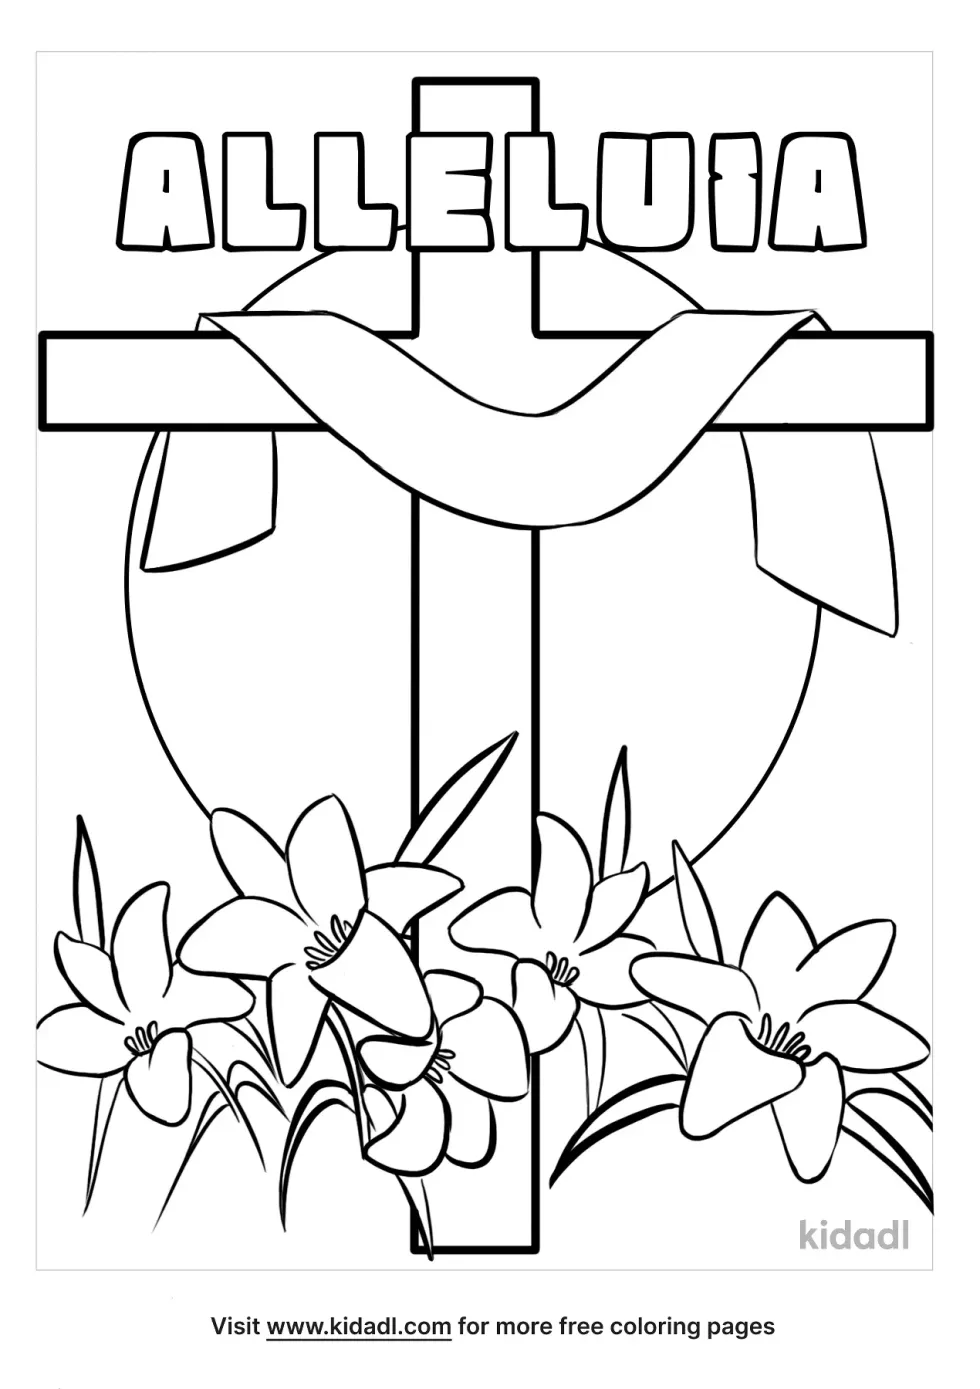 Alleluia Coloring Page